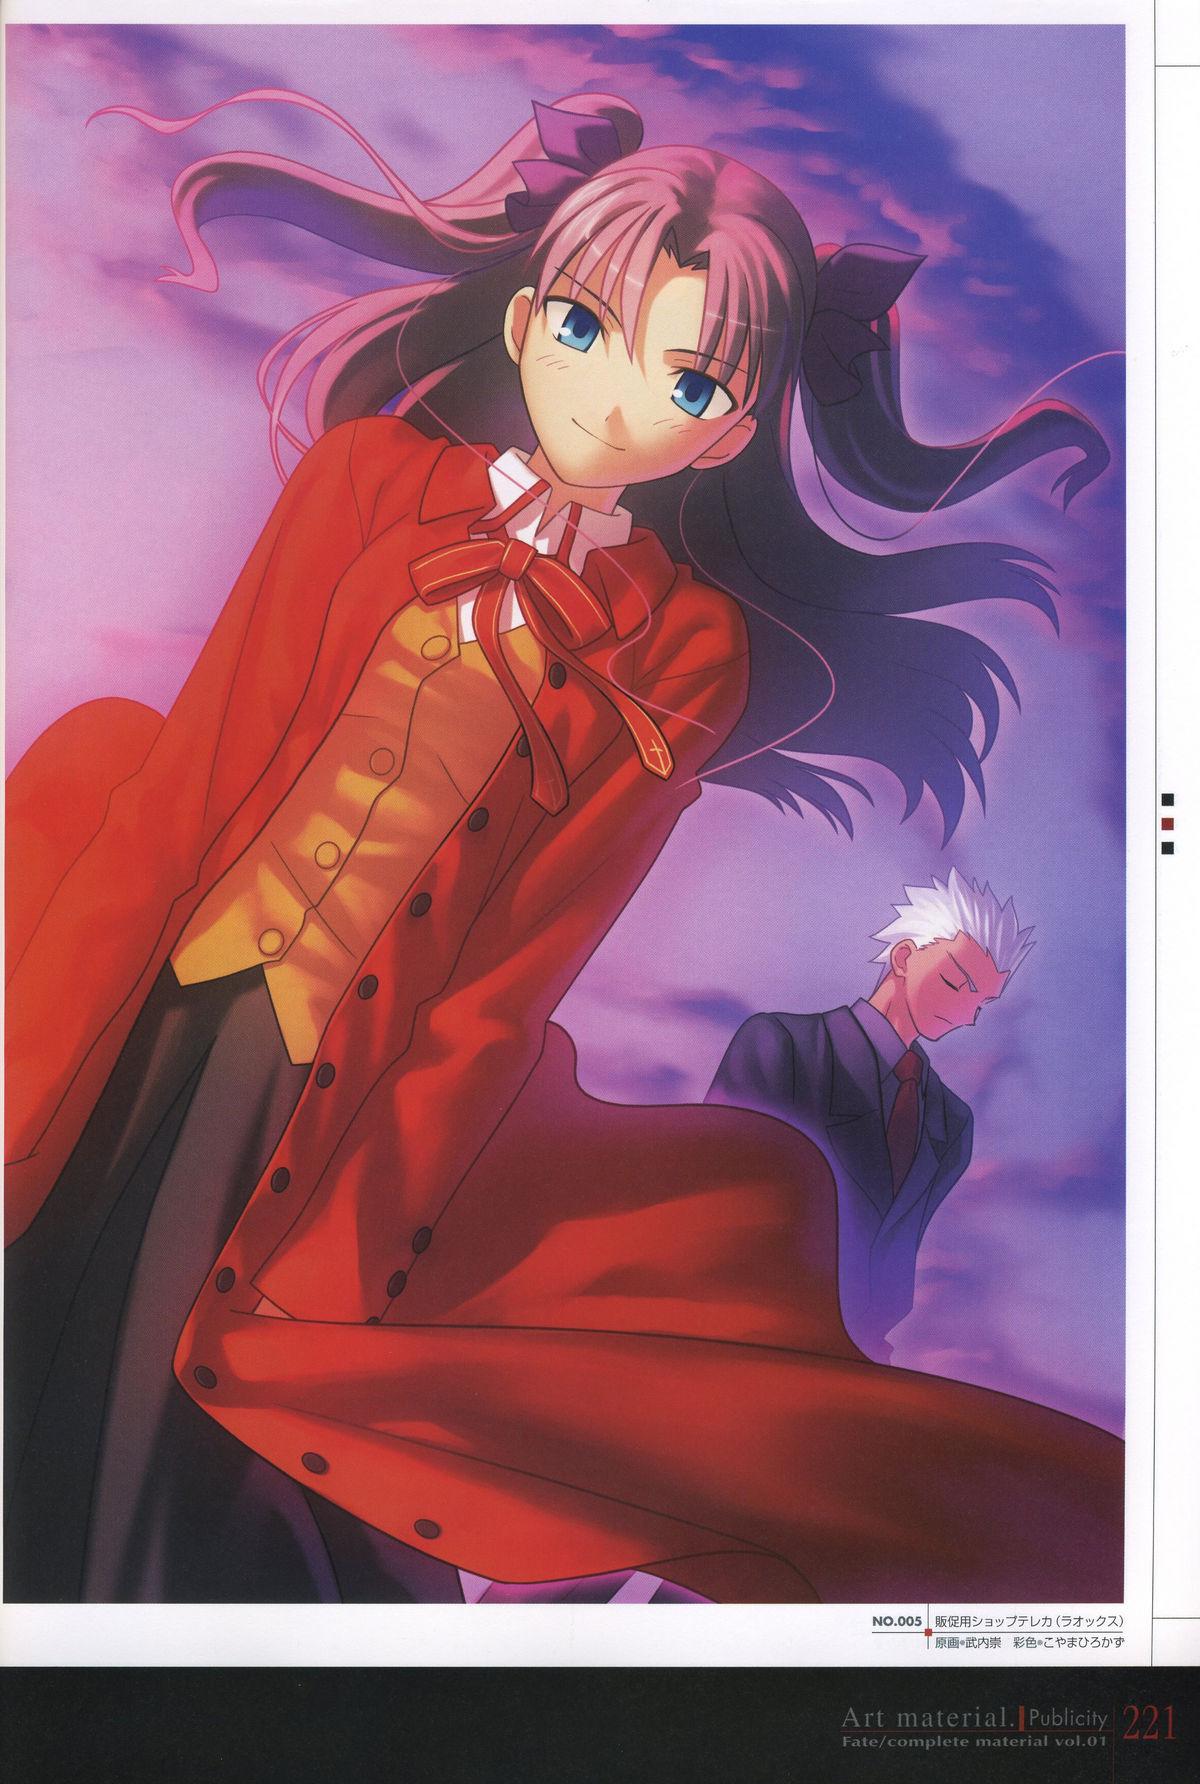 Fate/complete material I - Art material. 225